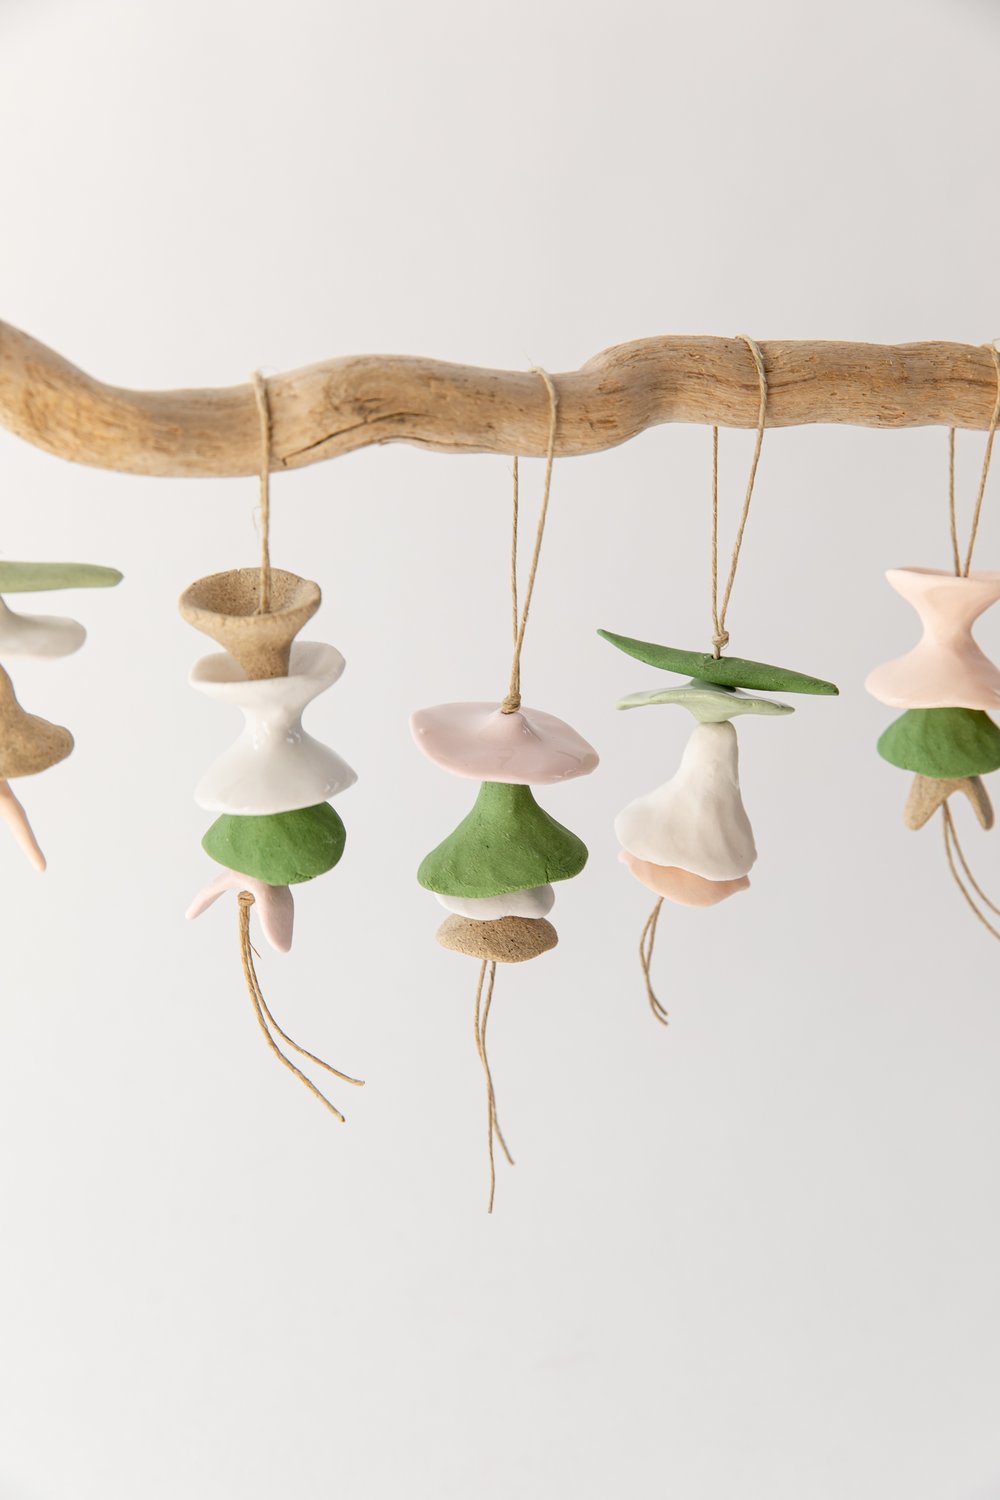 Image of Mini Floral Ornaments - Grass, Blush and Sand